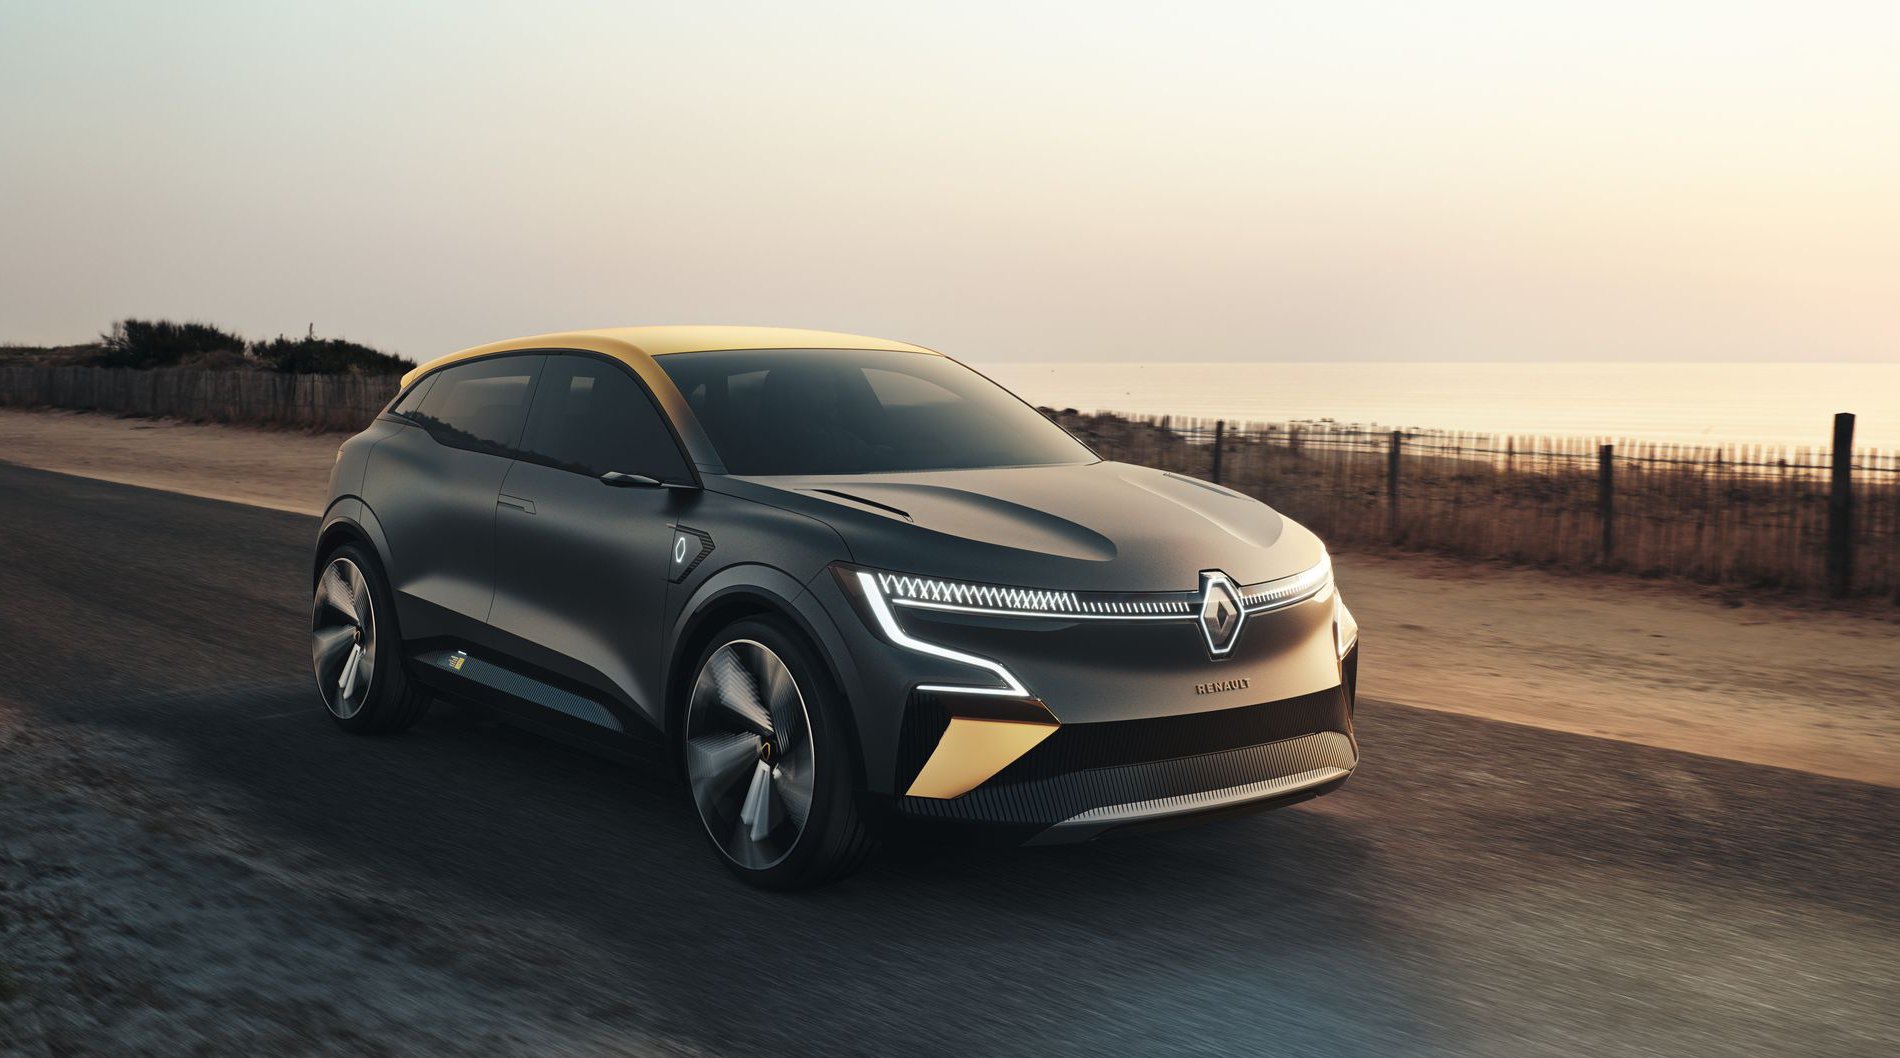 Renault eVision